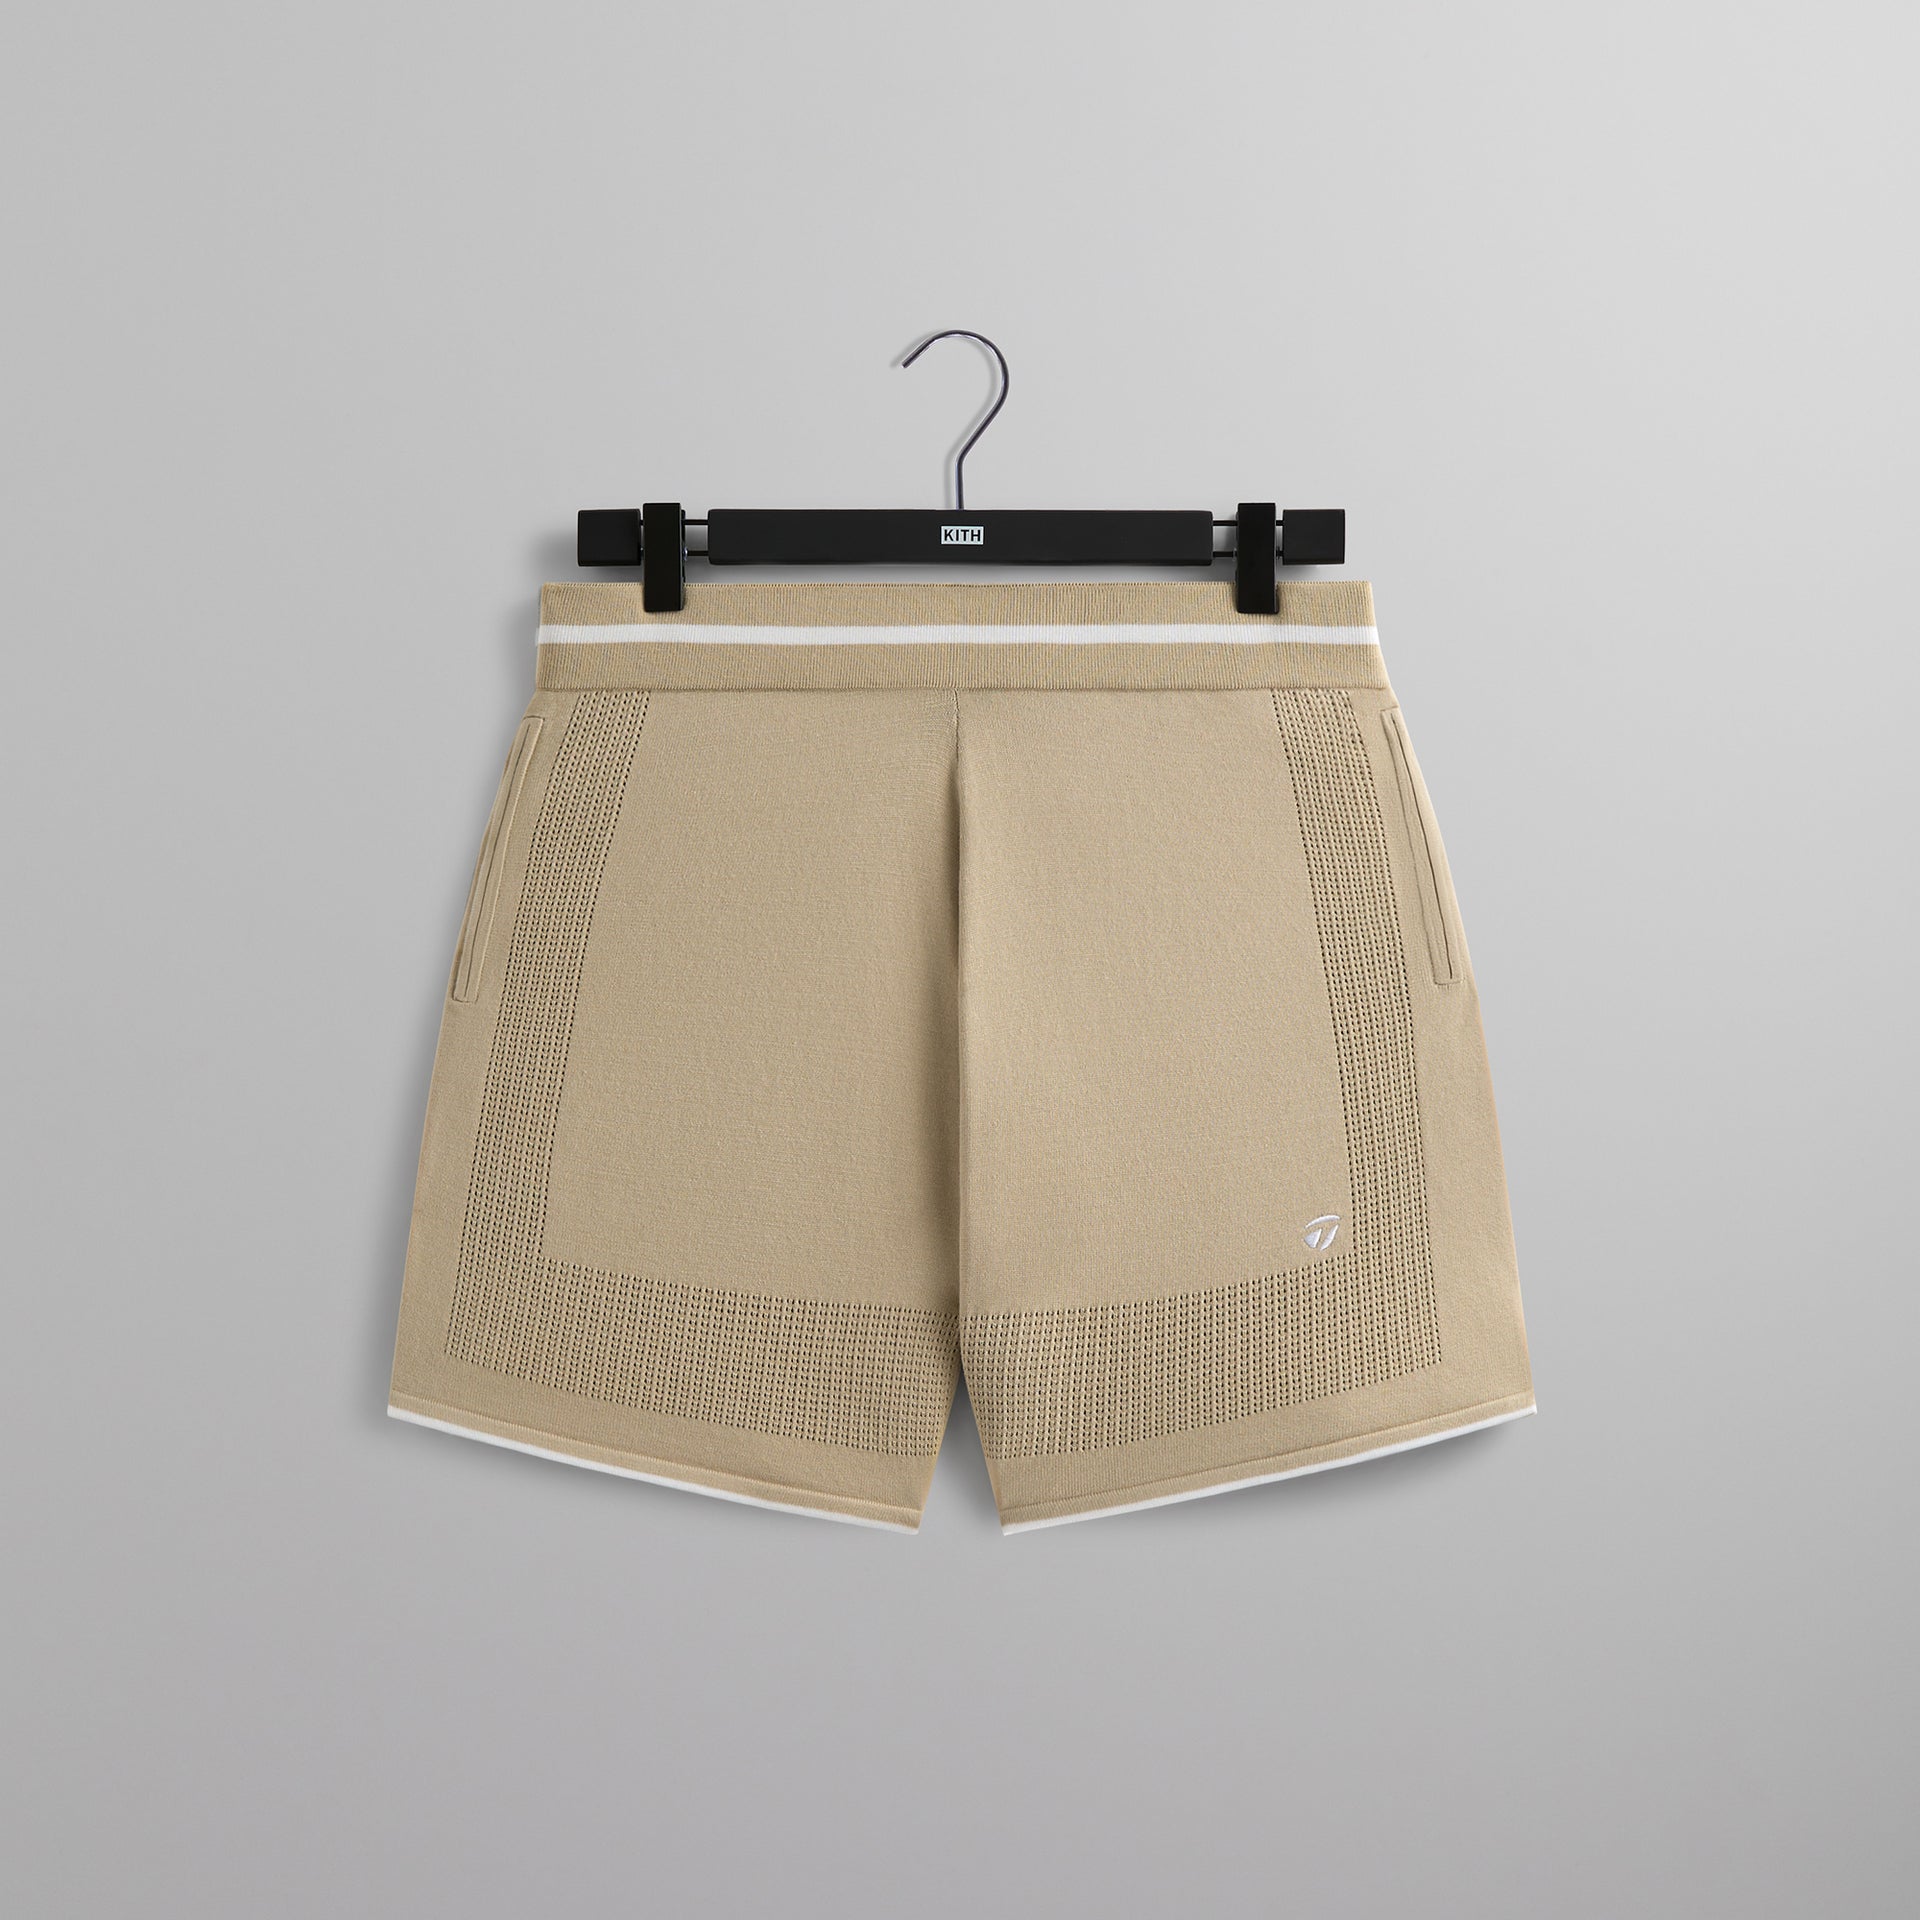 Kith for TaylorMade Chip Short - Malt